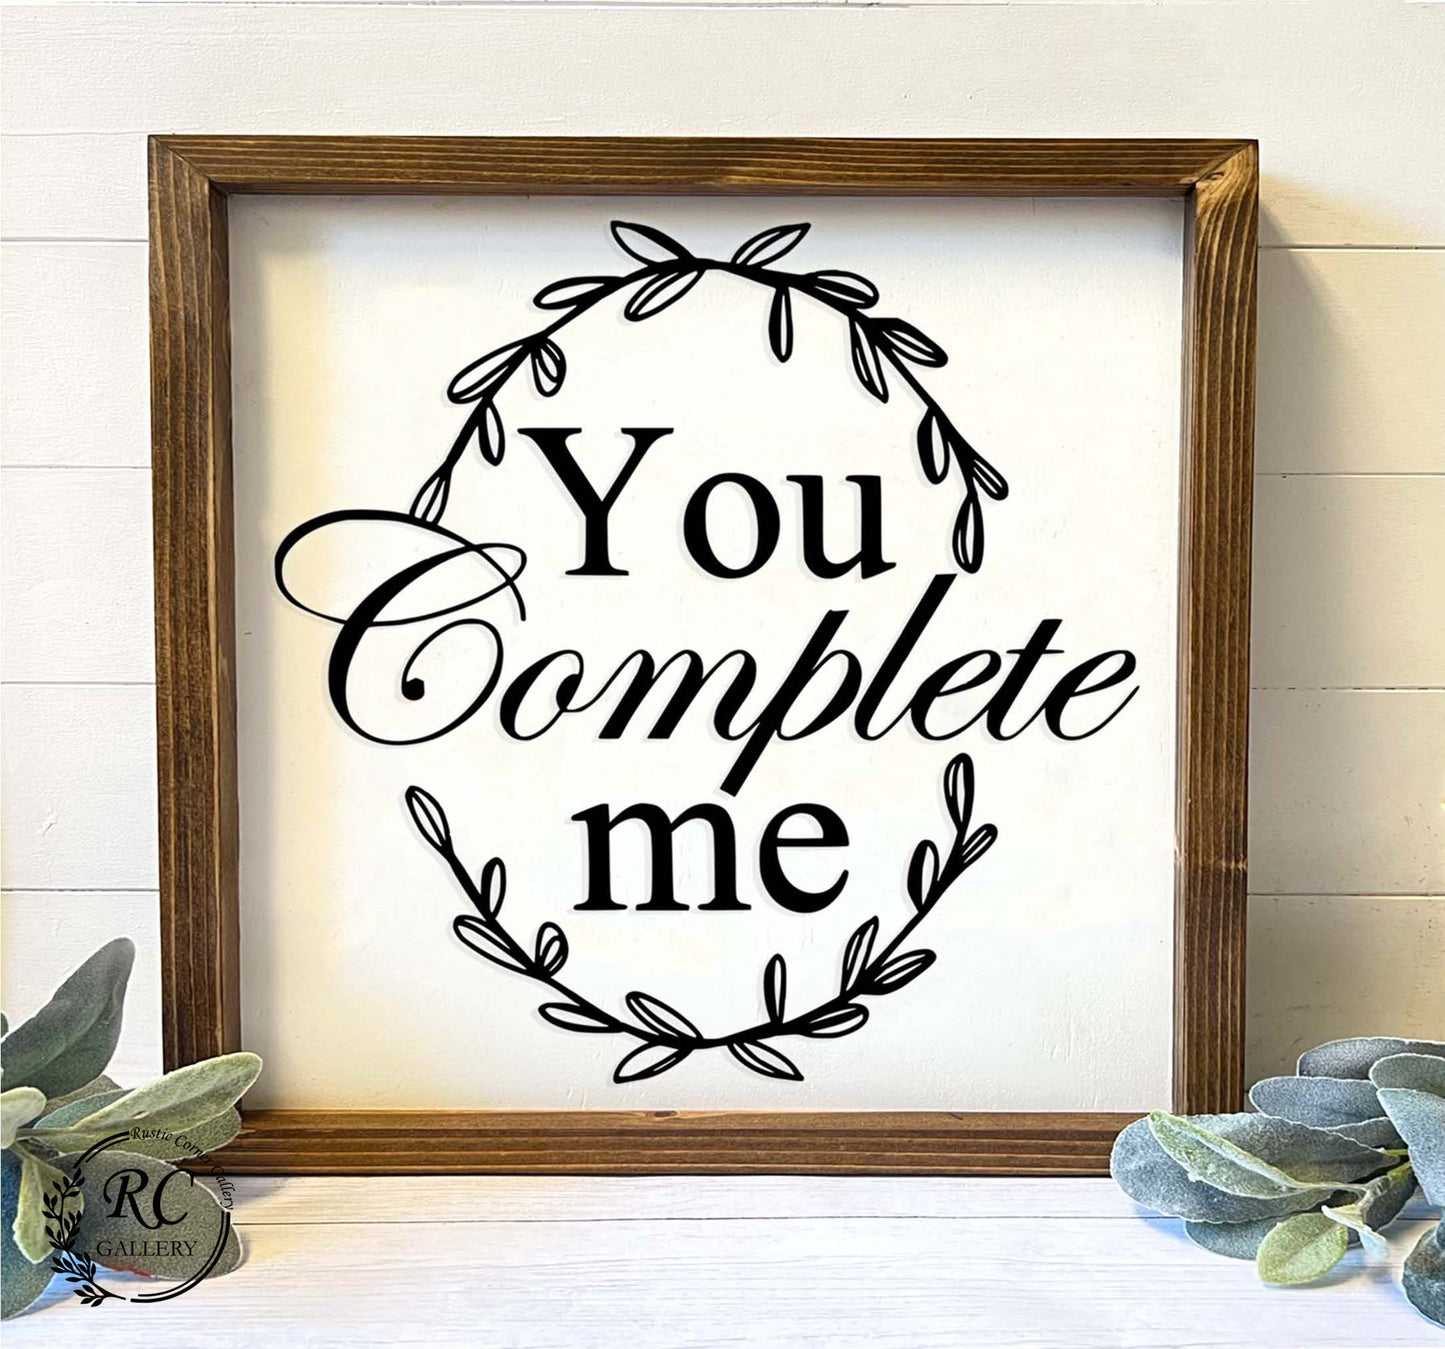 You complete me wood sign.